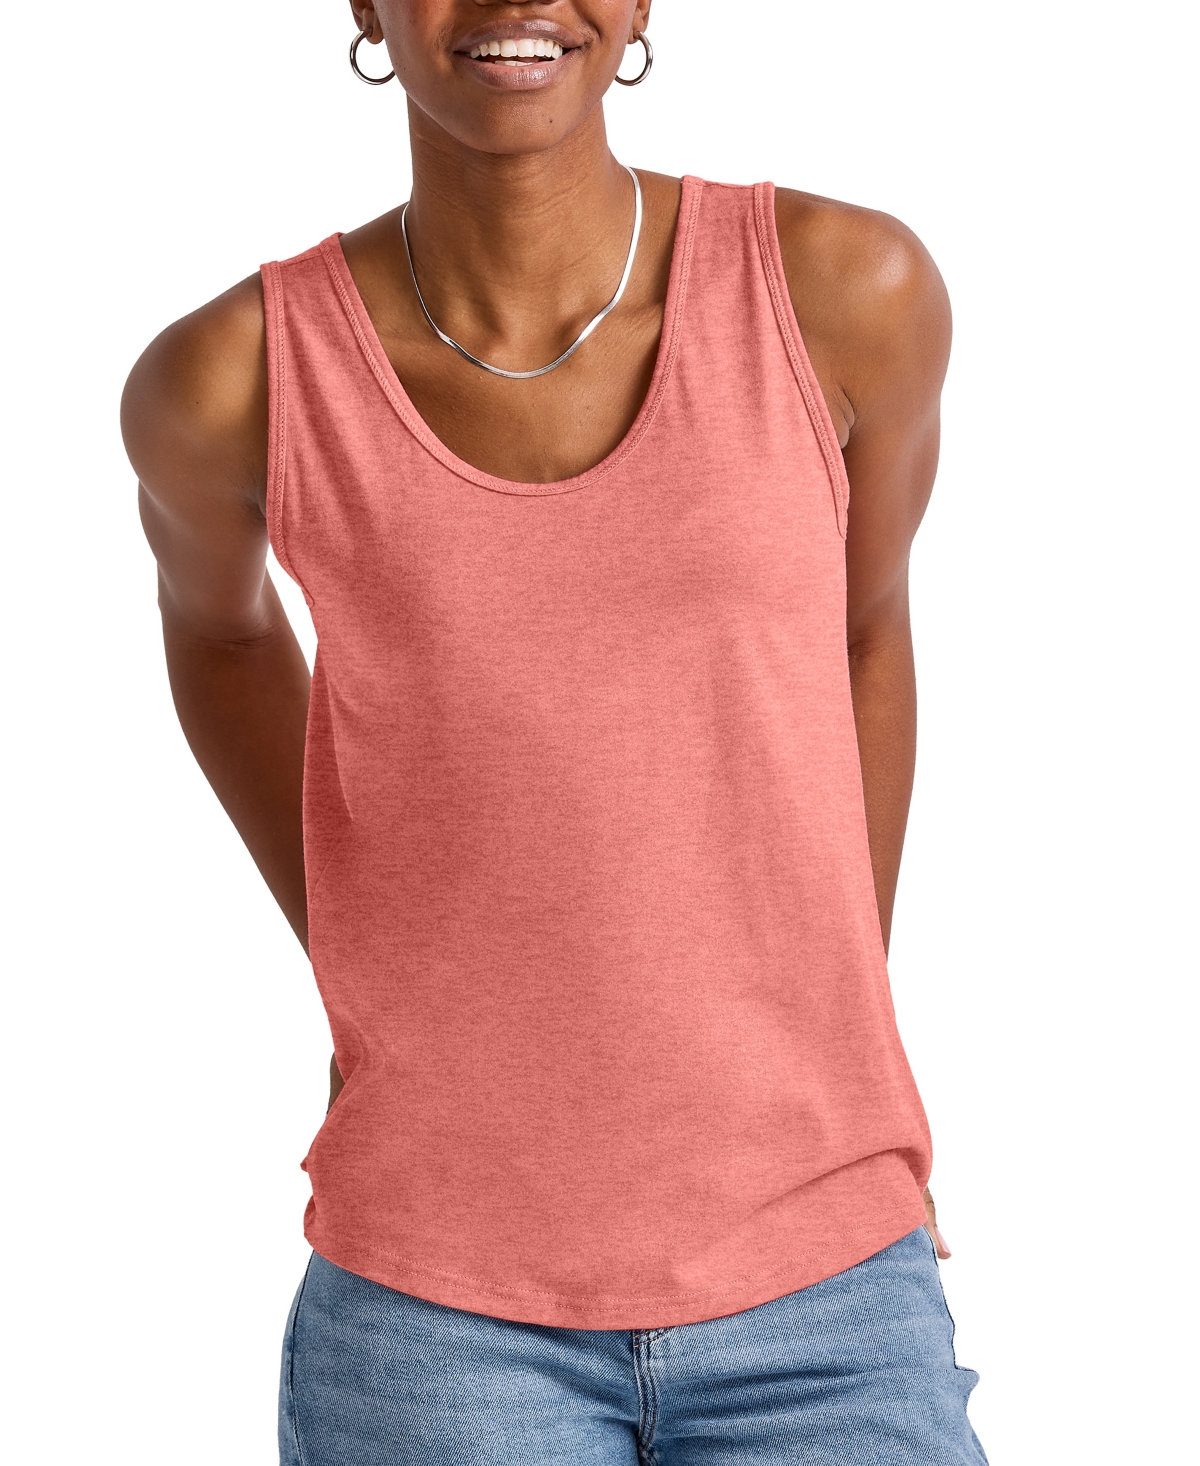 Hanes Women's Originals Triblend Tank Top In Concentrated Coral Heather